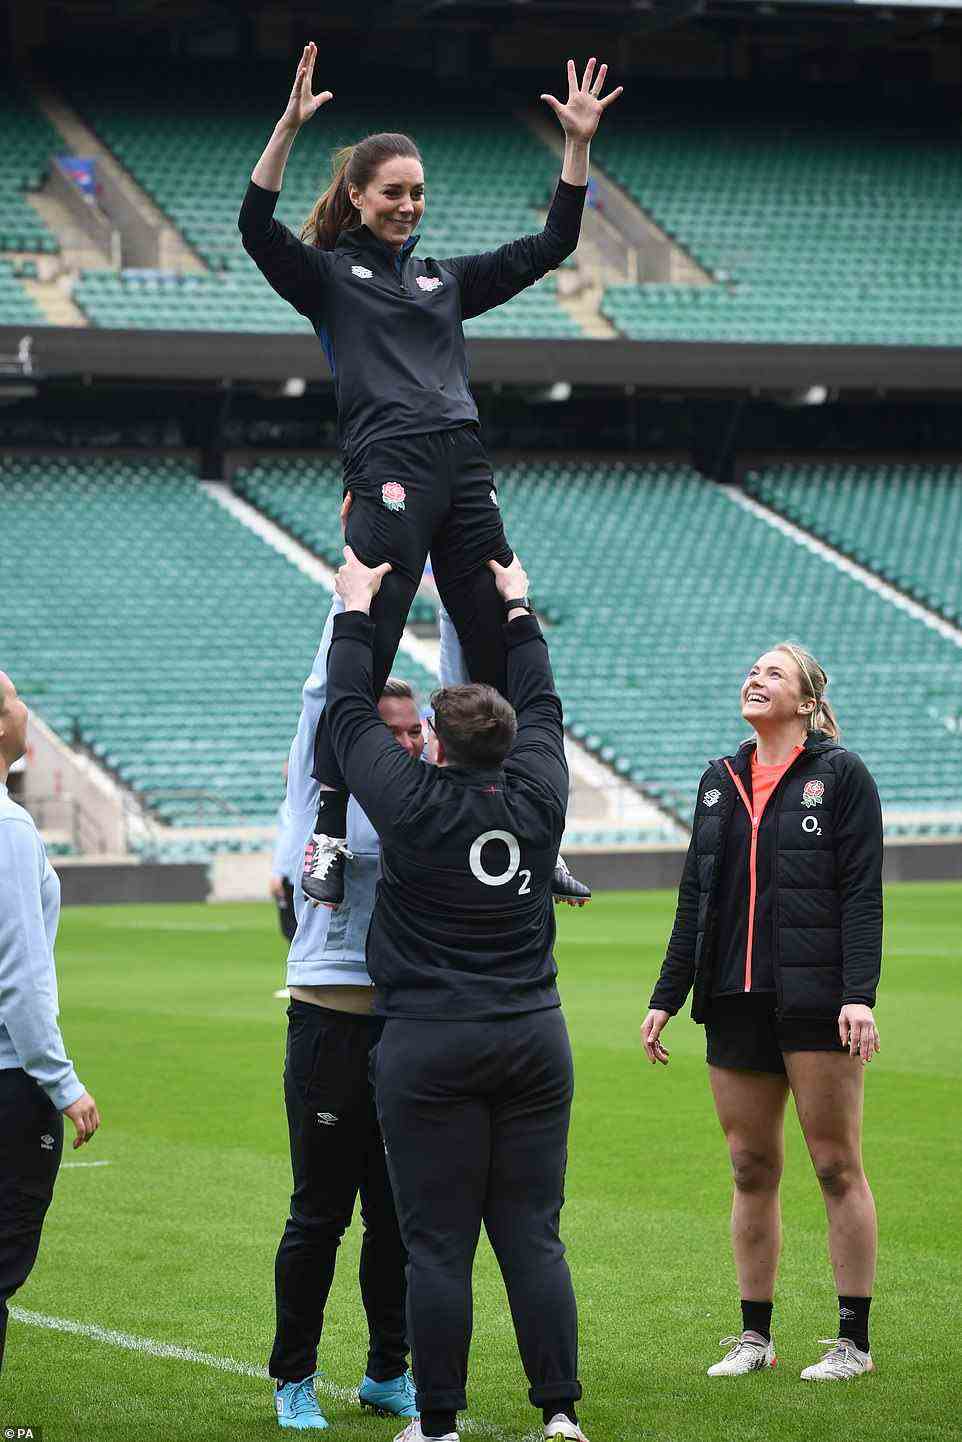 On top of the world! Kate was lifted up in a line-out during a visit to Twickenham Stadium where she met with England stars